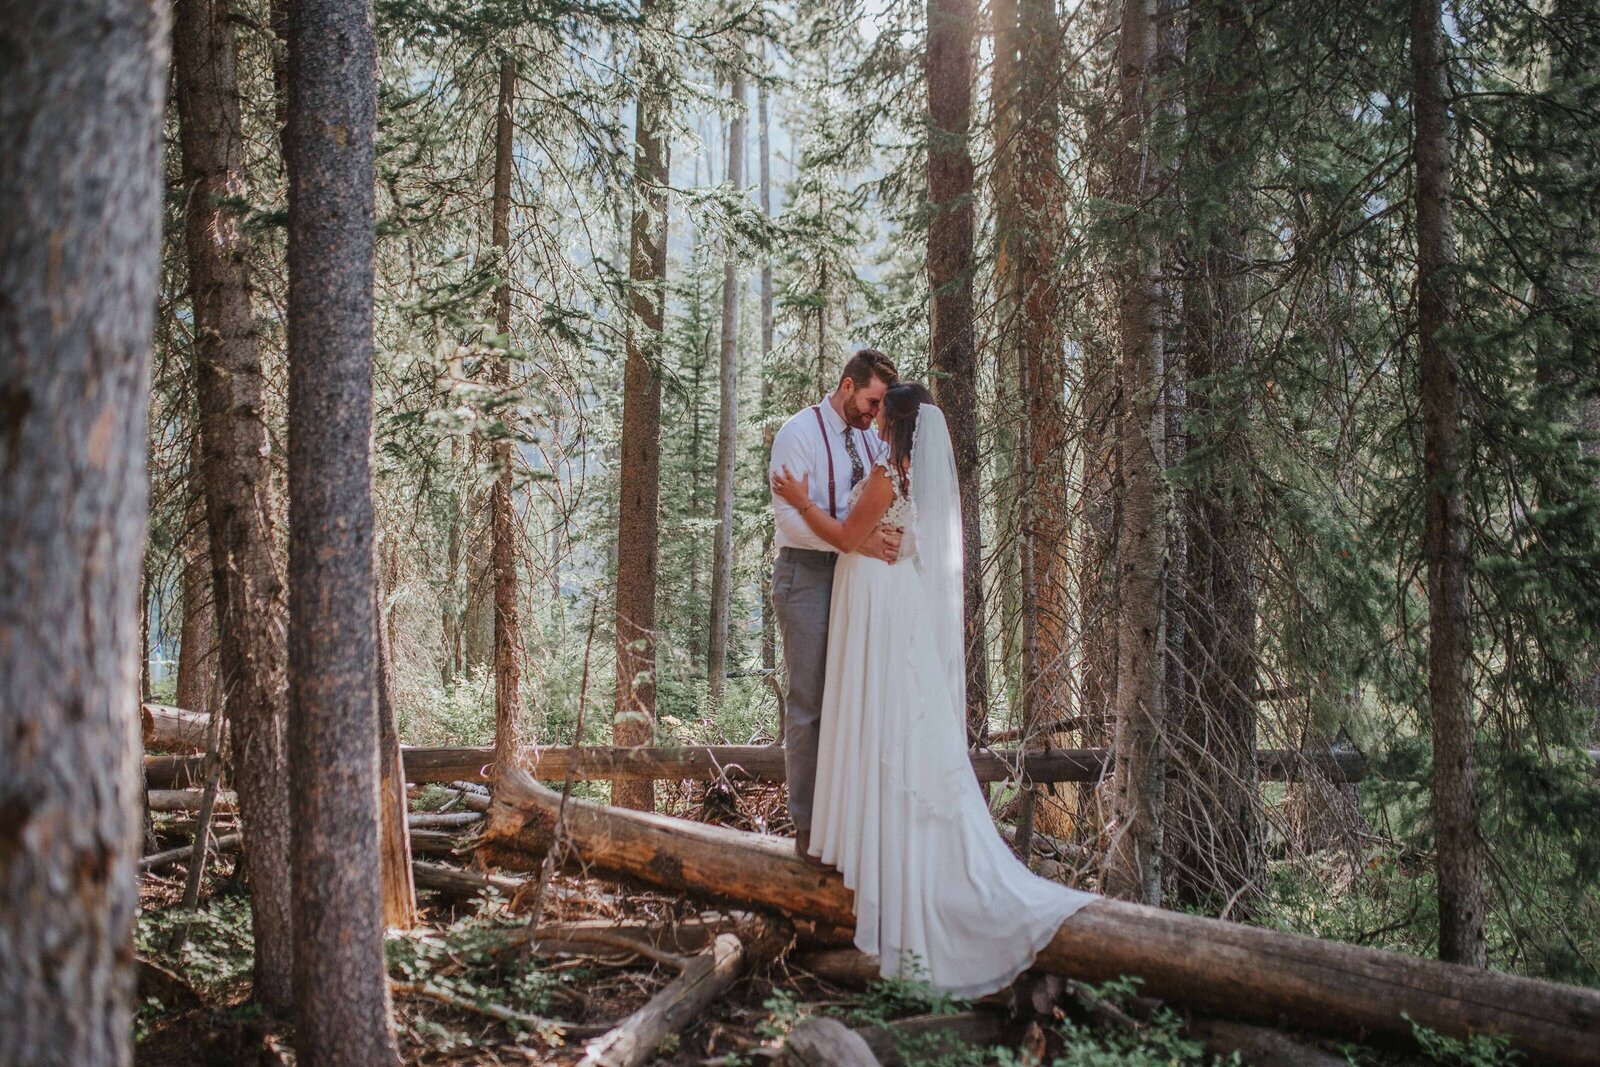 Sacramento Wedding Photographer captures bride and groom standing on log together in forest bridals at Lake Tahoe elopement